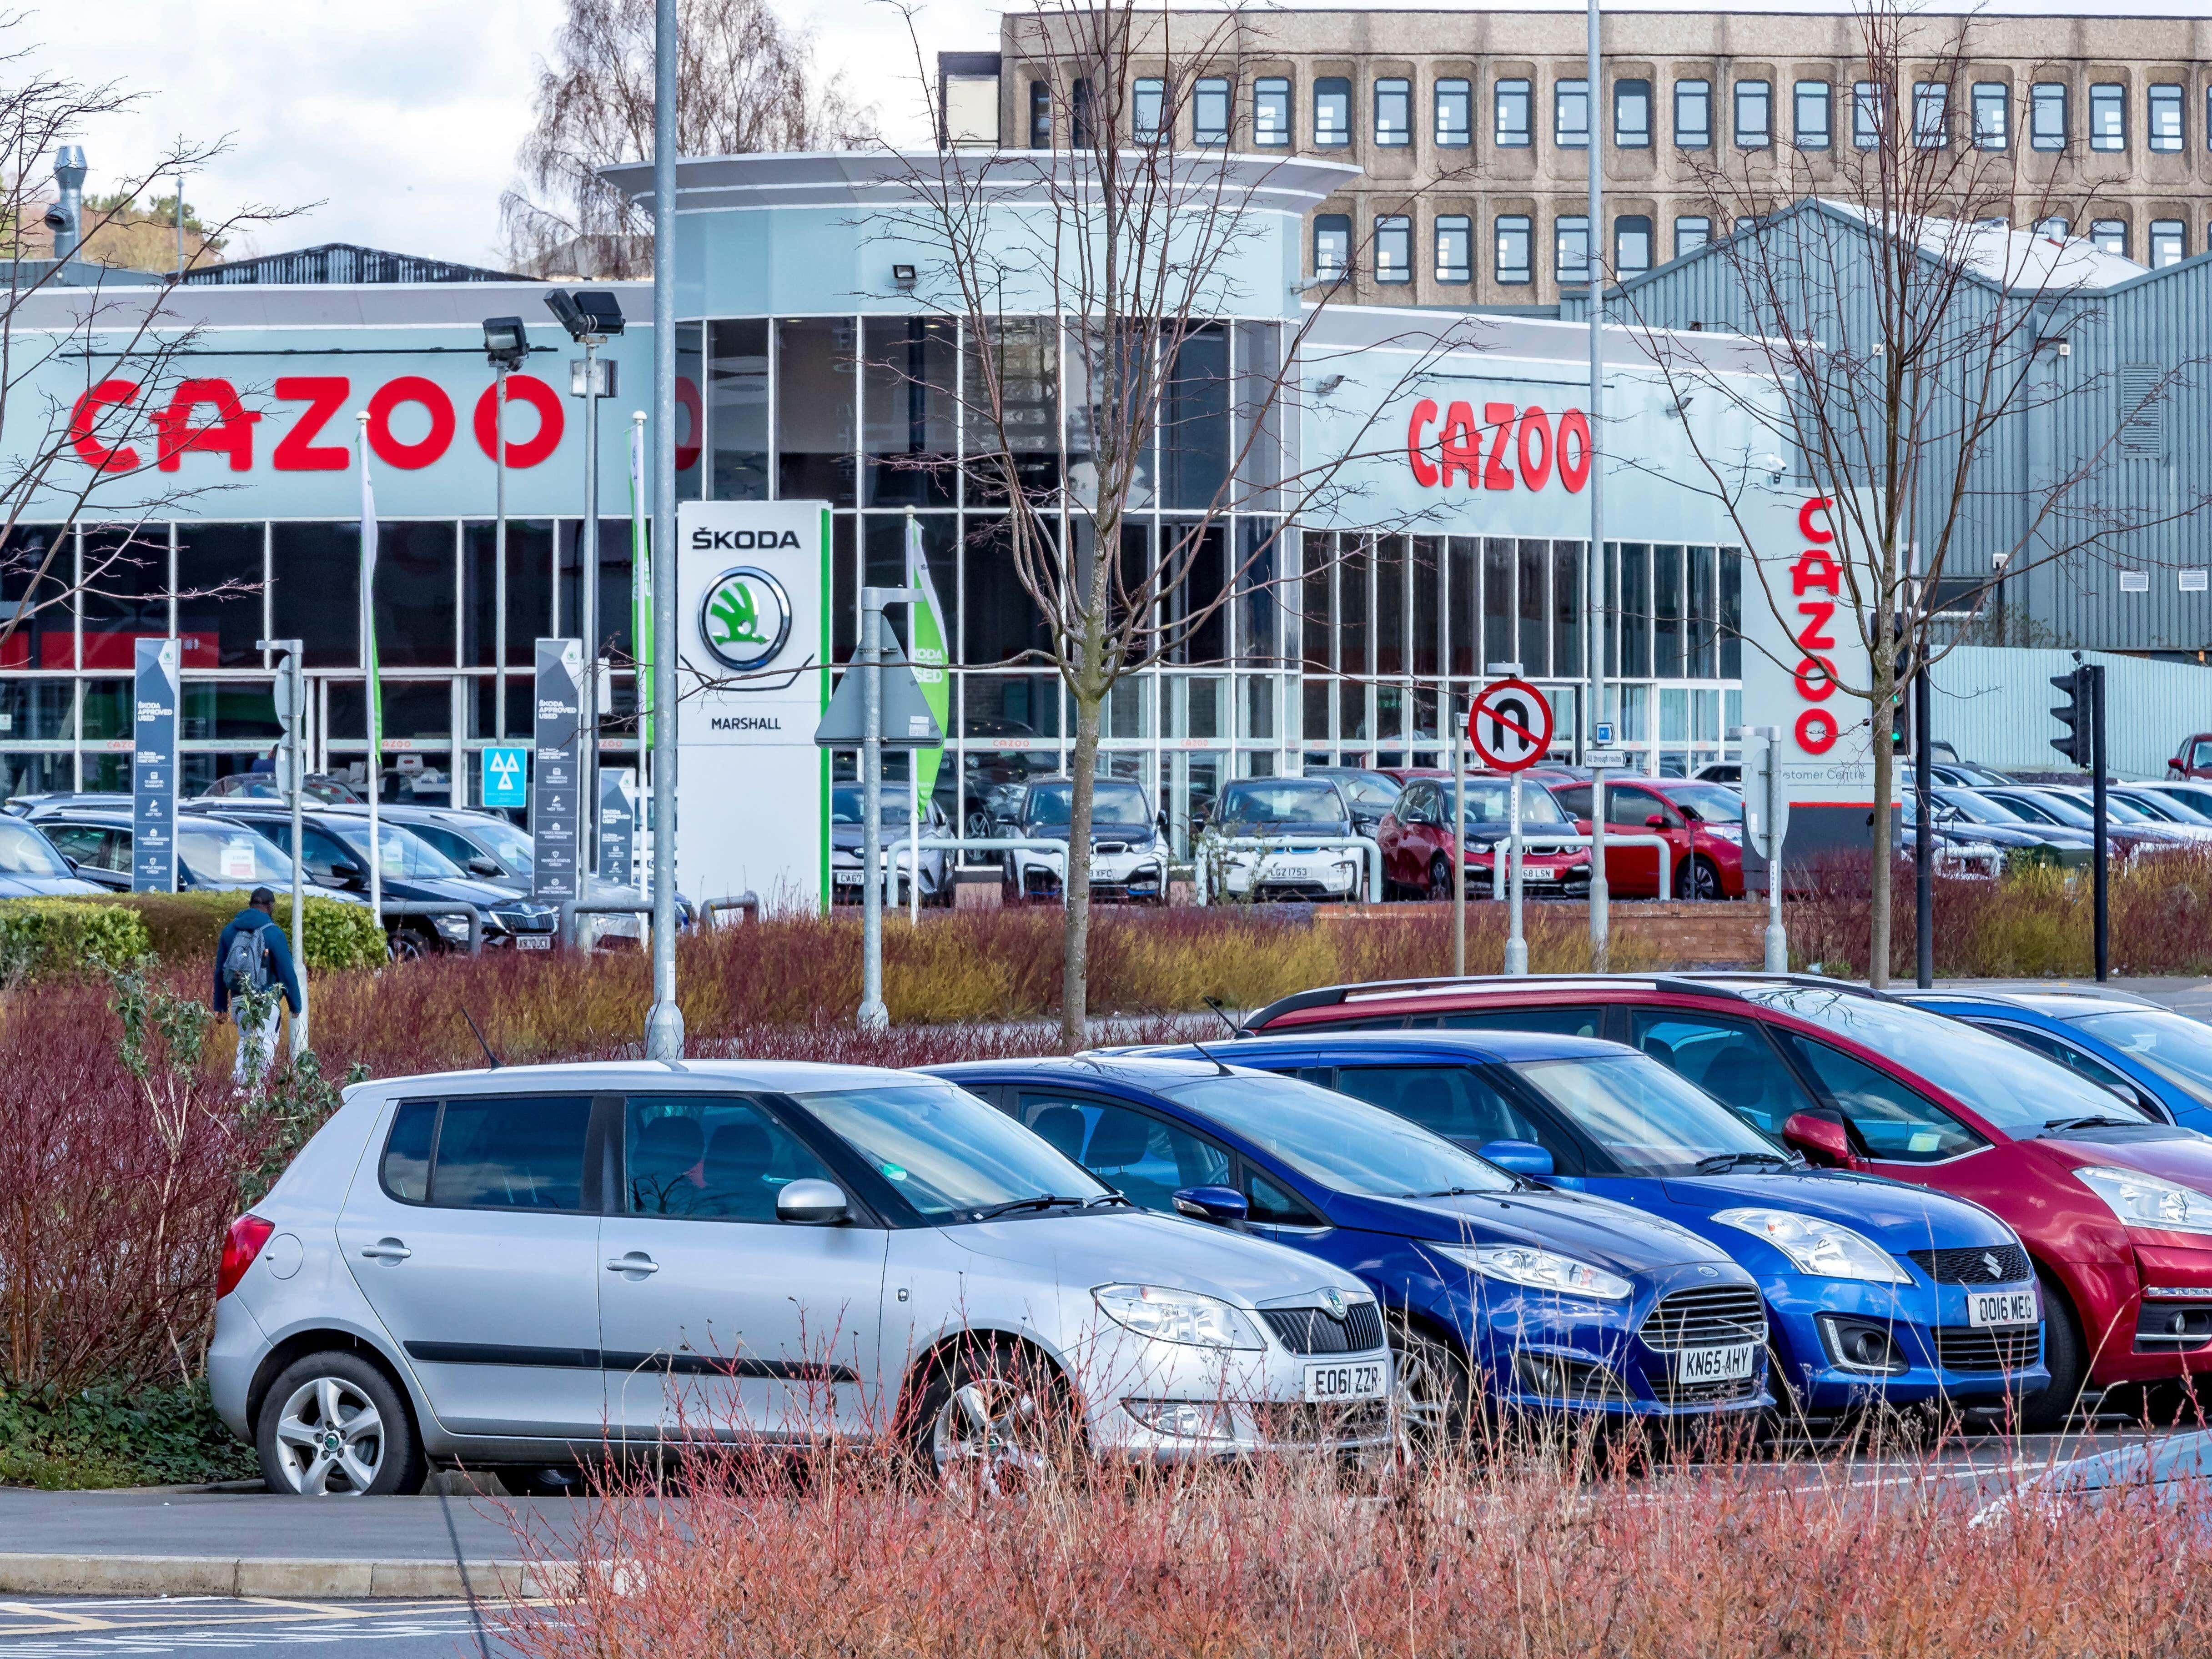 Online car seller Cazoo falls into administration